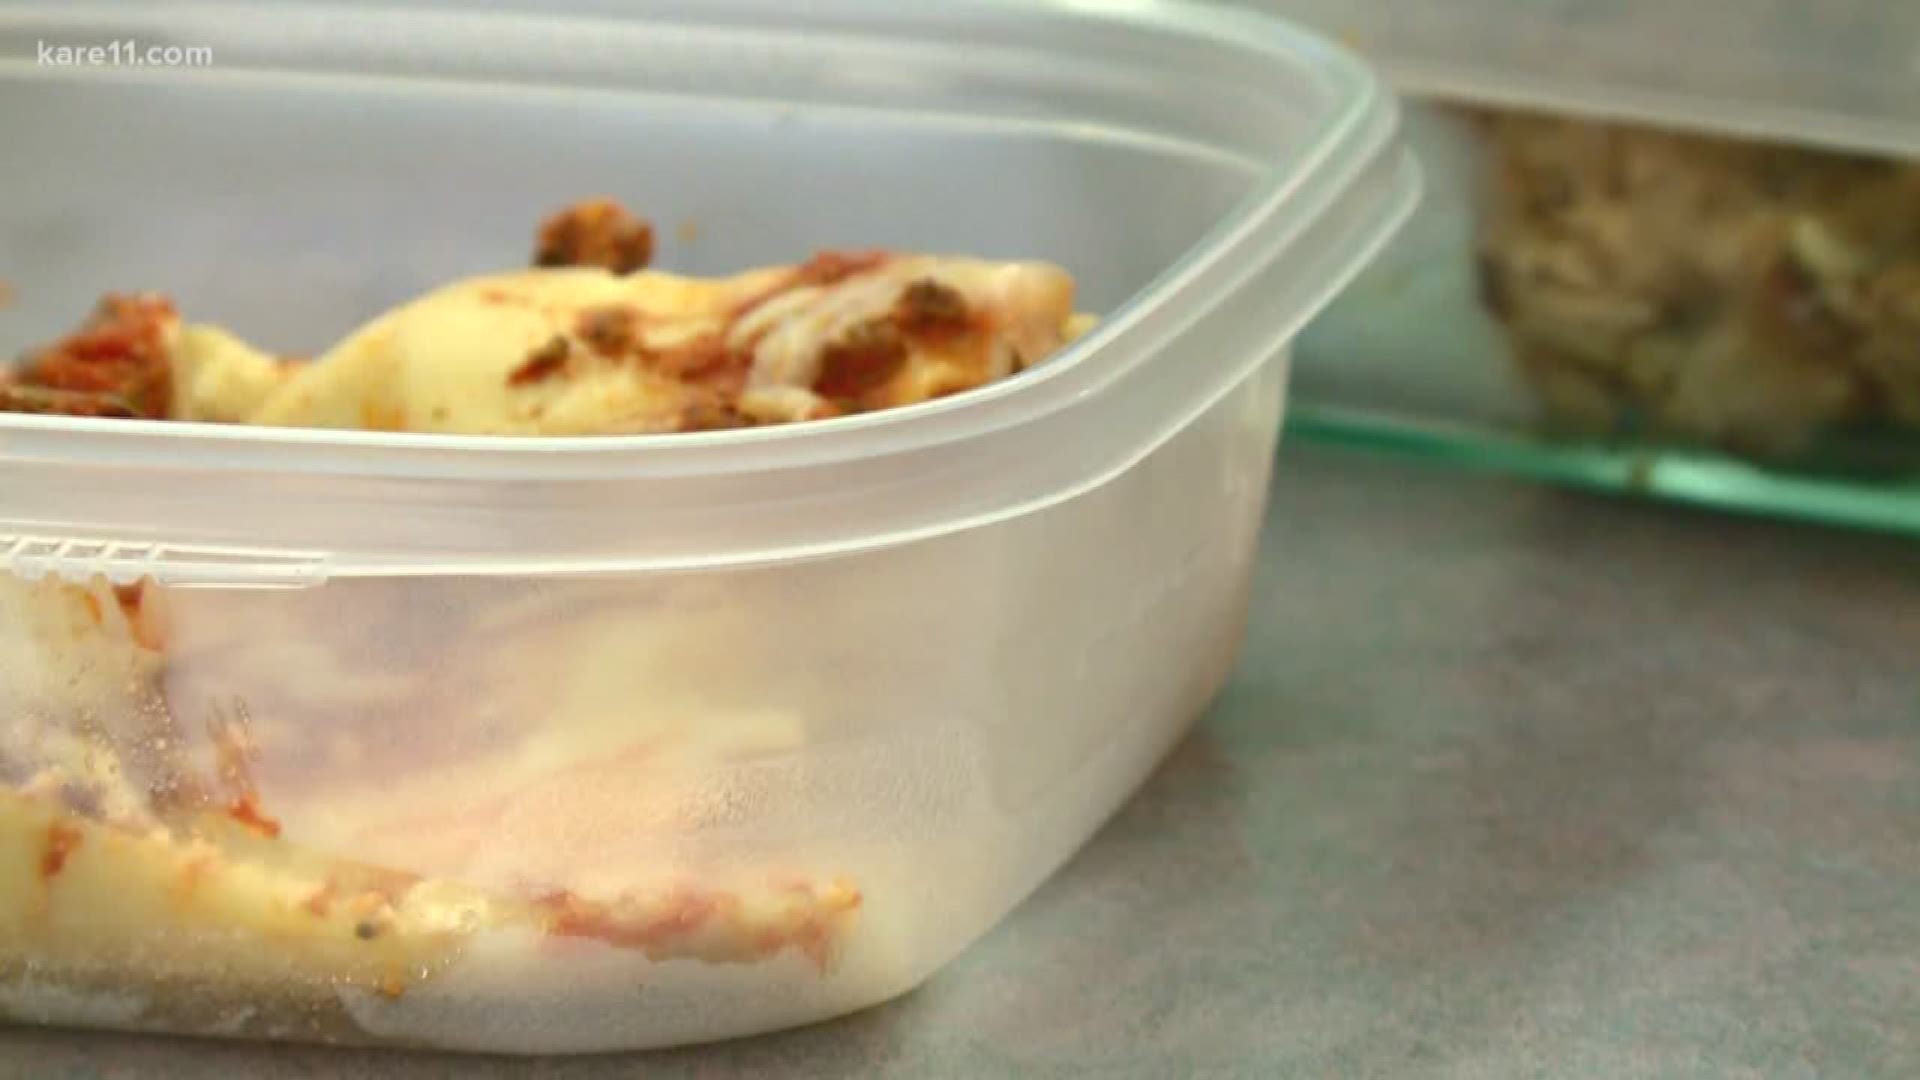 Doctors say don't microwave children's food in plastic containers